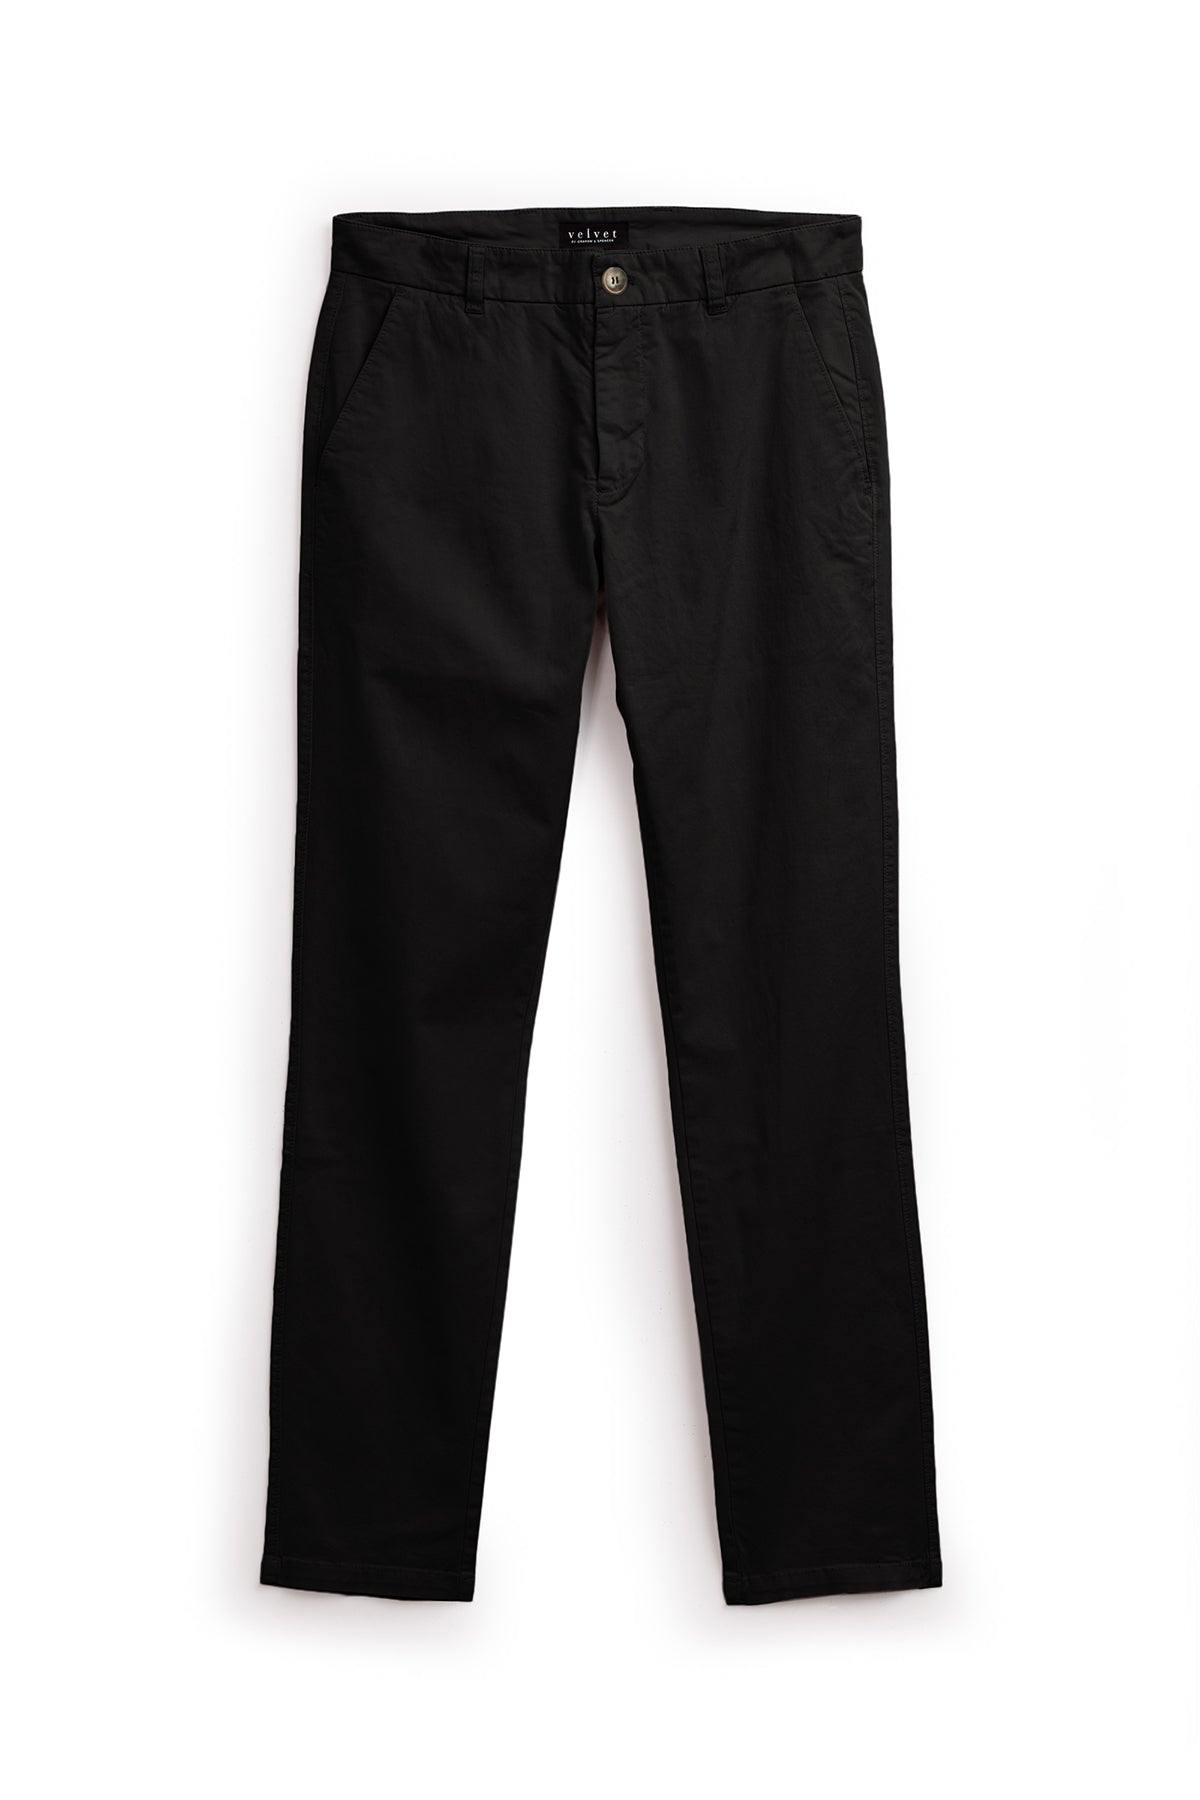 Velvet by Graham & Spencer's BROGAN COTTON TWILL PANT in flawless fit black chino pants on a white background.-20811077157057